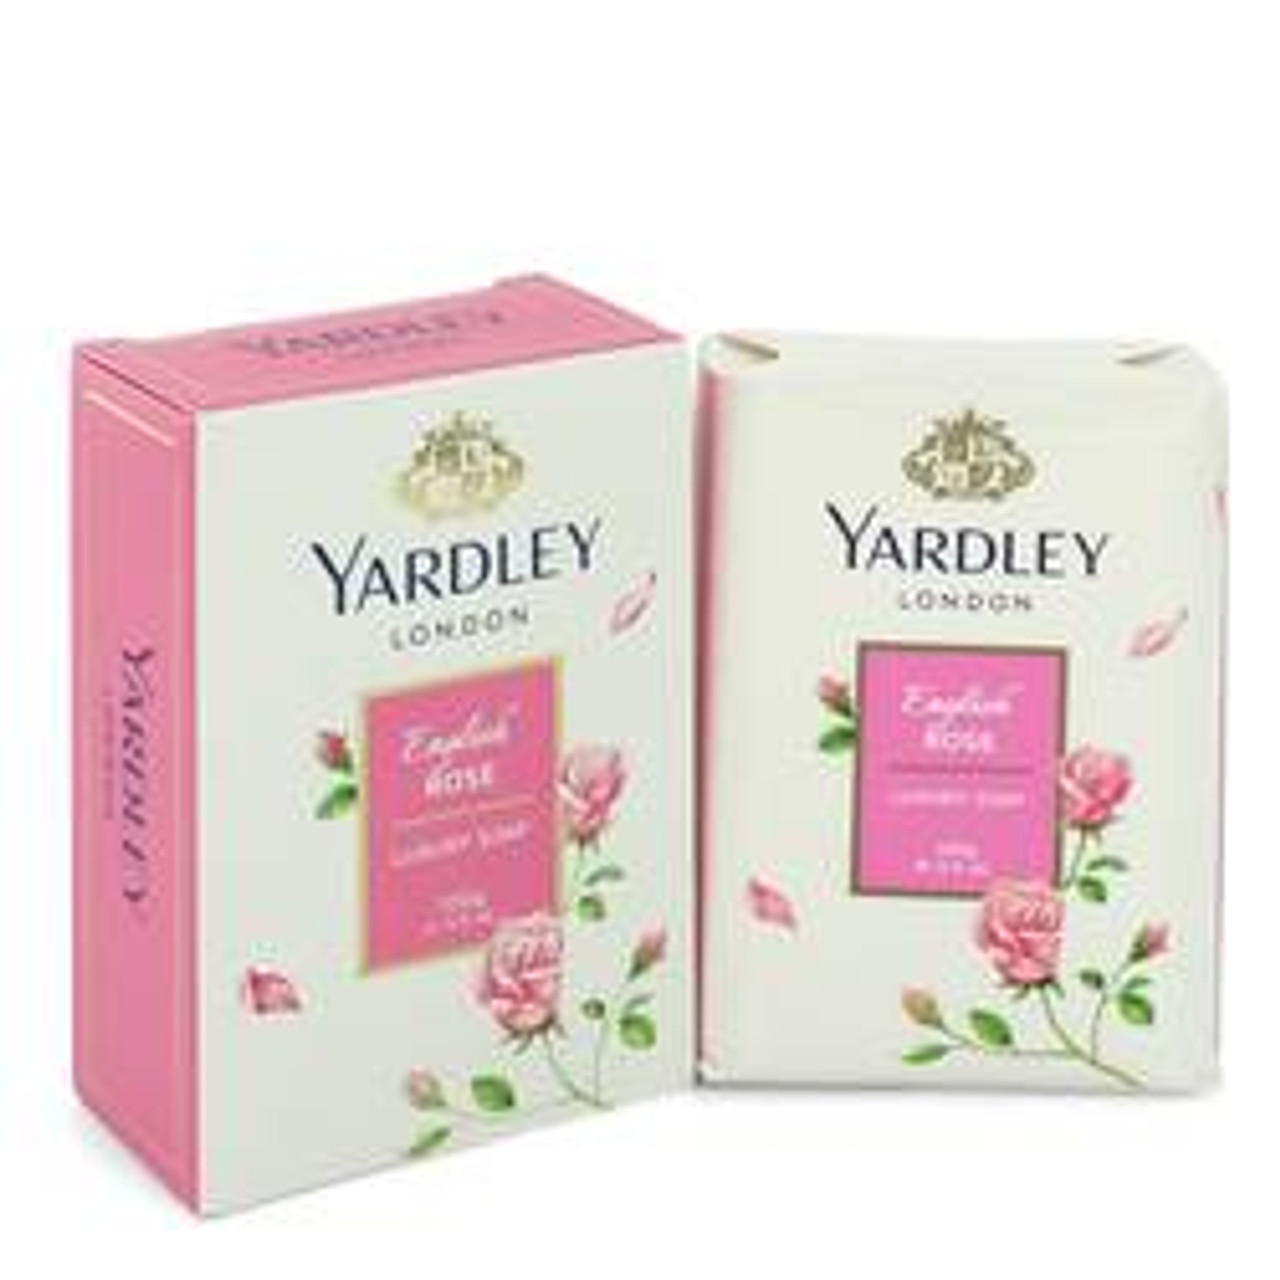 English Rose Yardley Perfume By Yardley London Luxury Soap 3.5 oz for Women - [From 19.00 - Choose pk Qty ] - *Ships from Miami